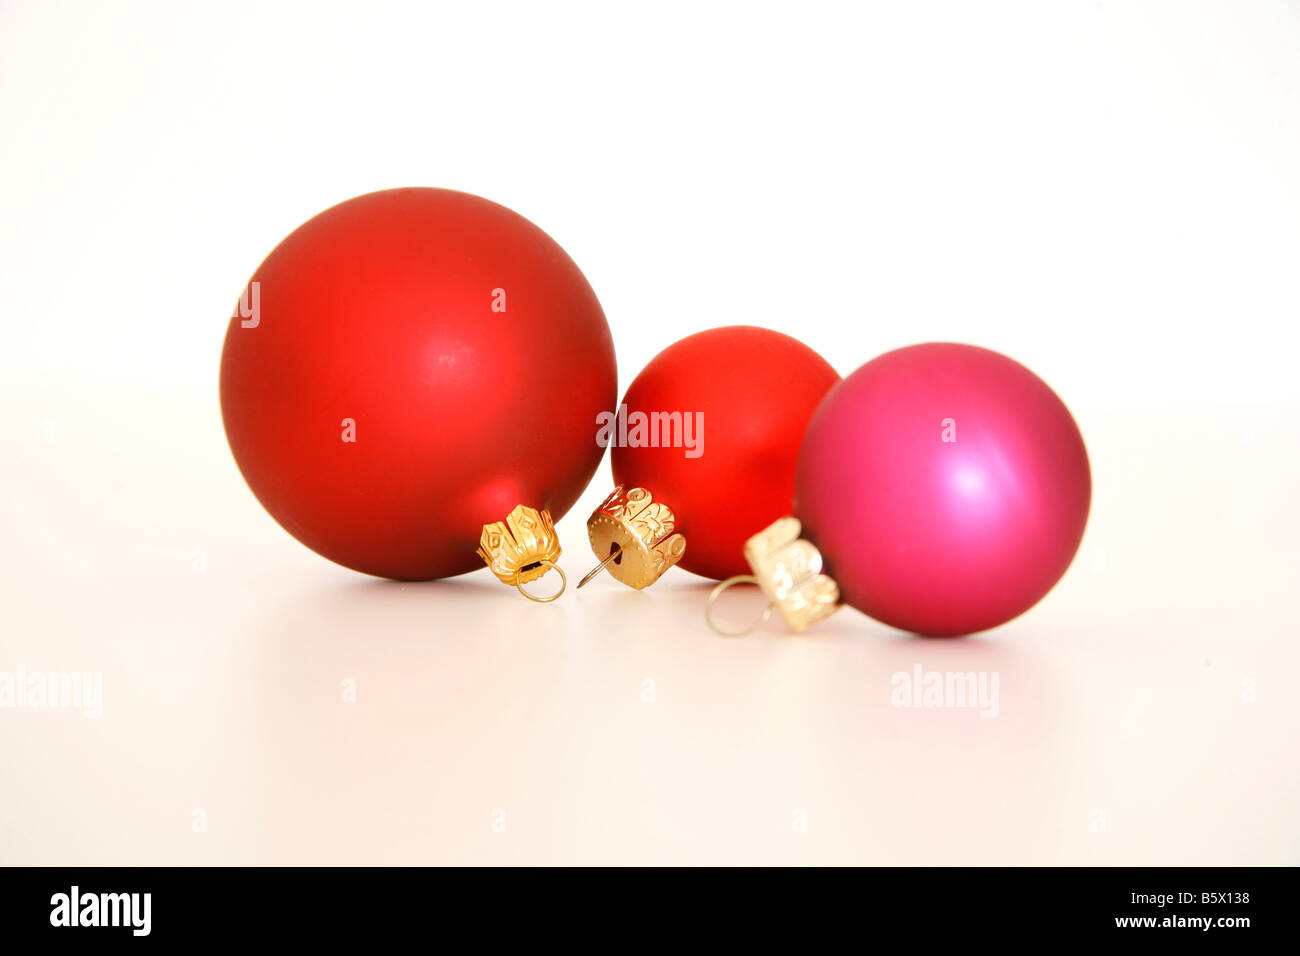 Three Christmas ball decorations with drop shadow Stock Photo